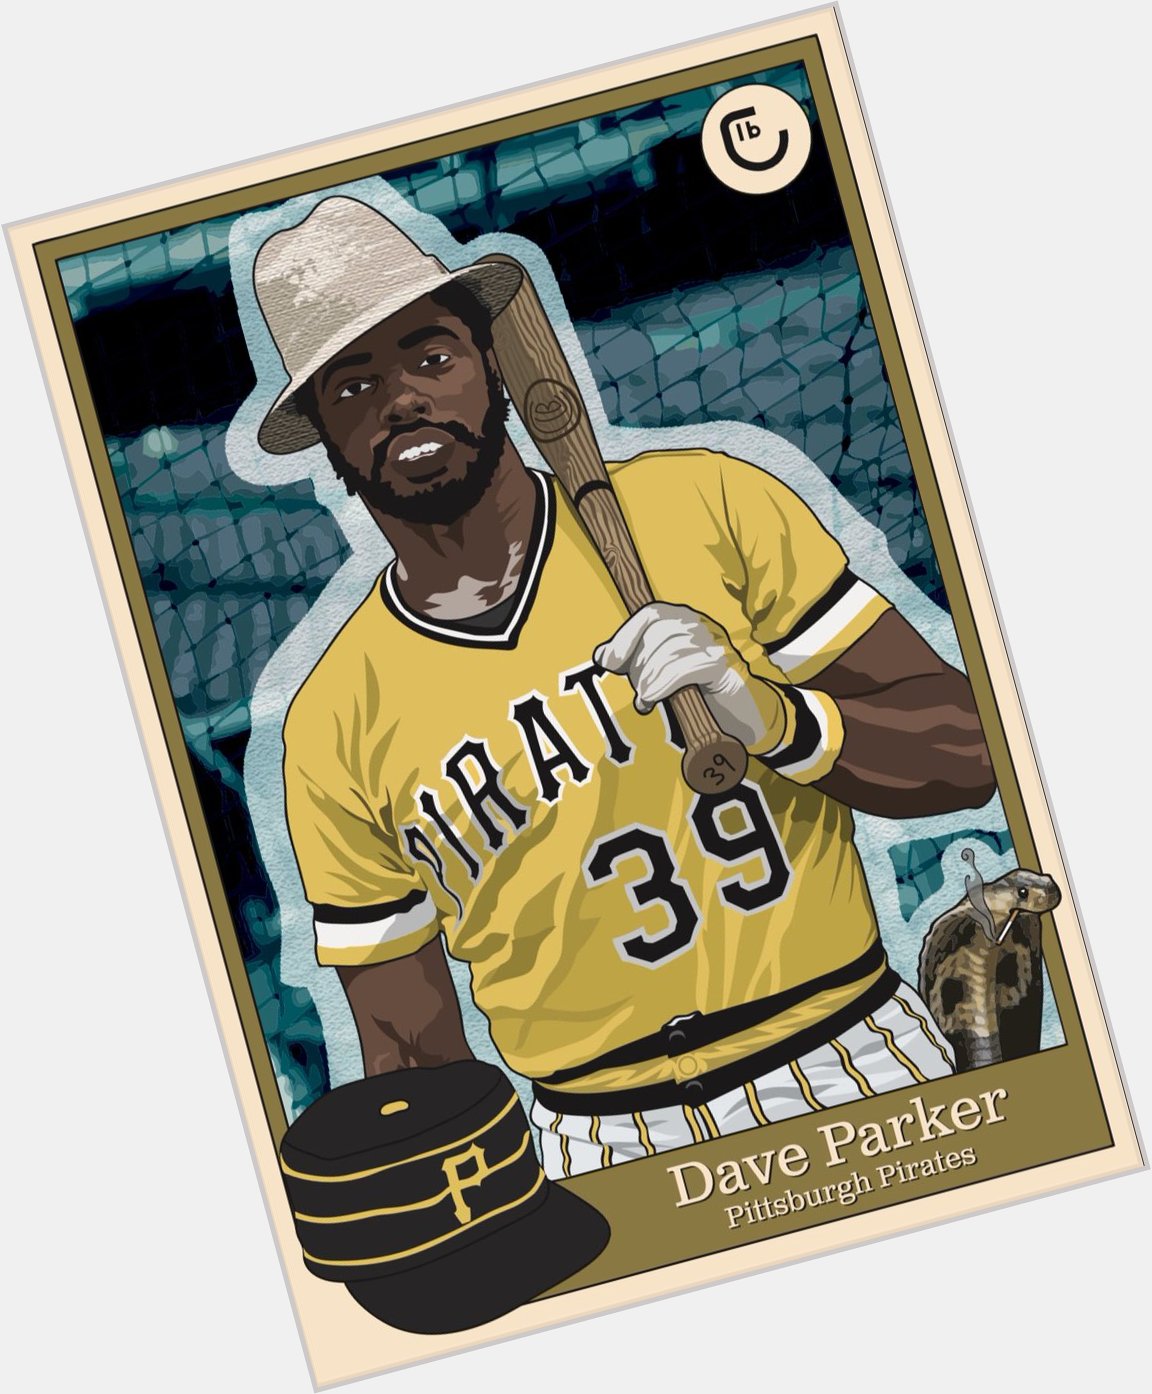 Another design I ve had in my arsenal, happy birthday Dave Parker! 